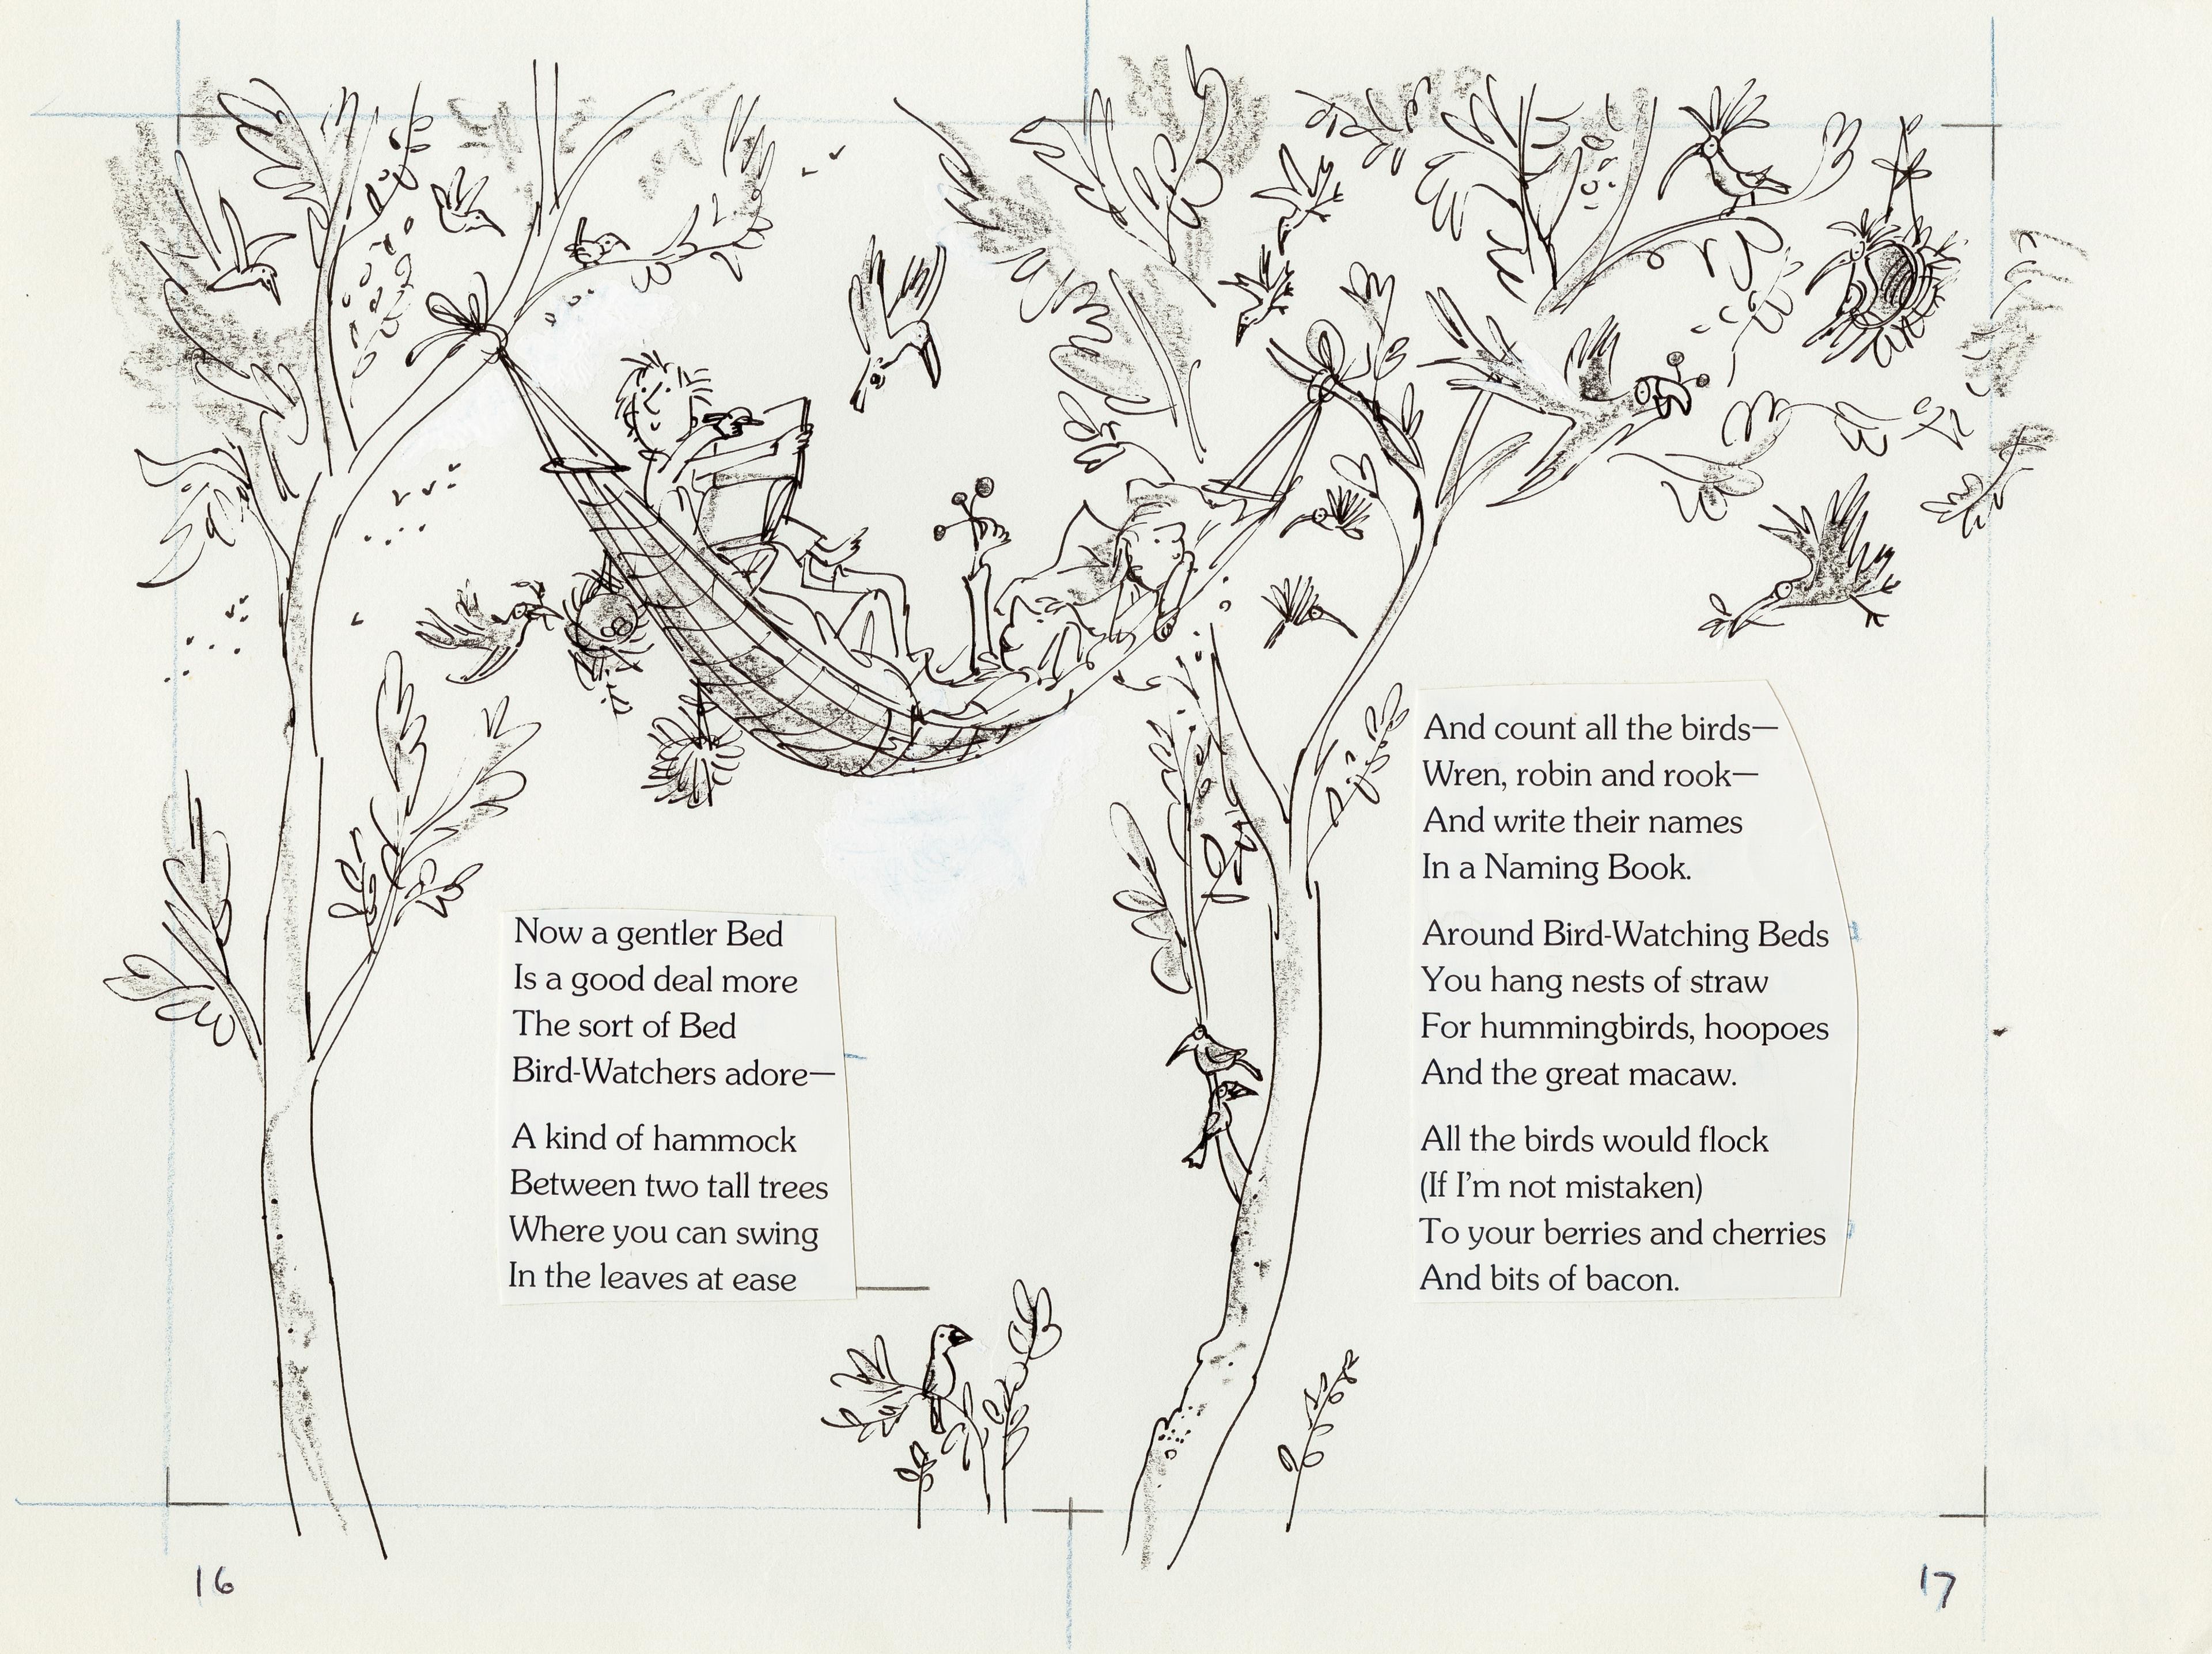 Line drawing of three children in a hammock in treetops surrounded by birds